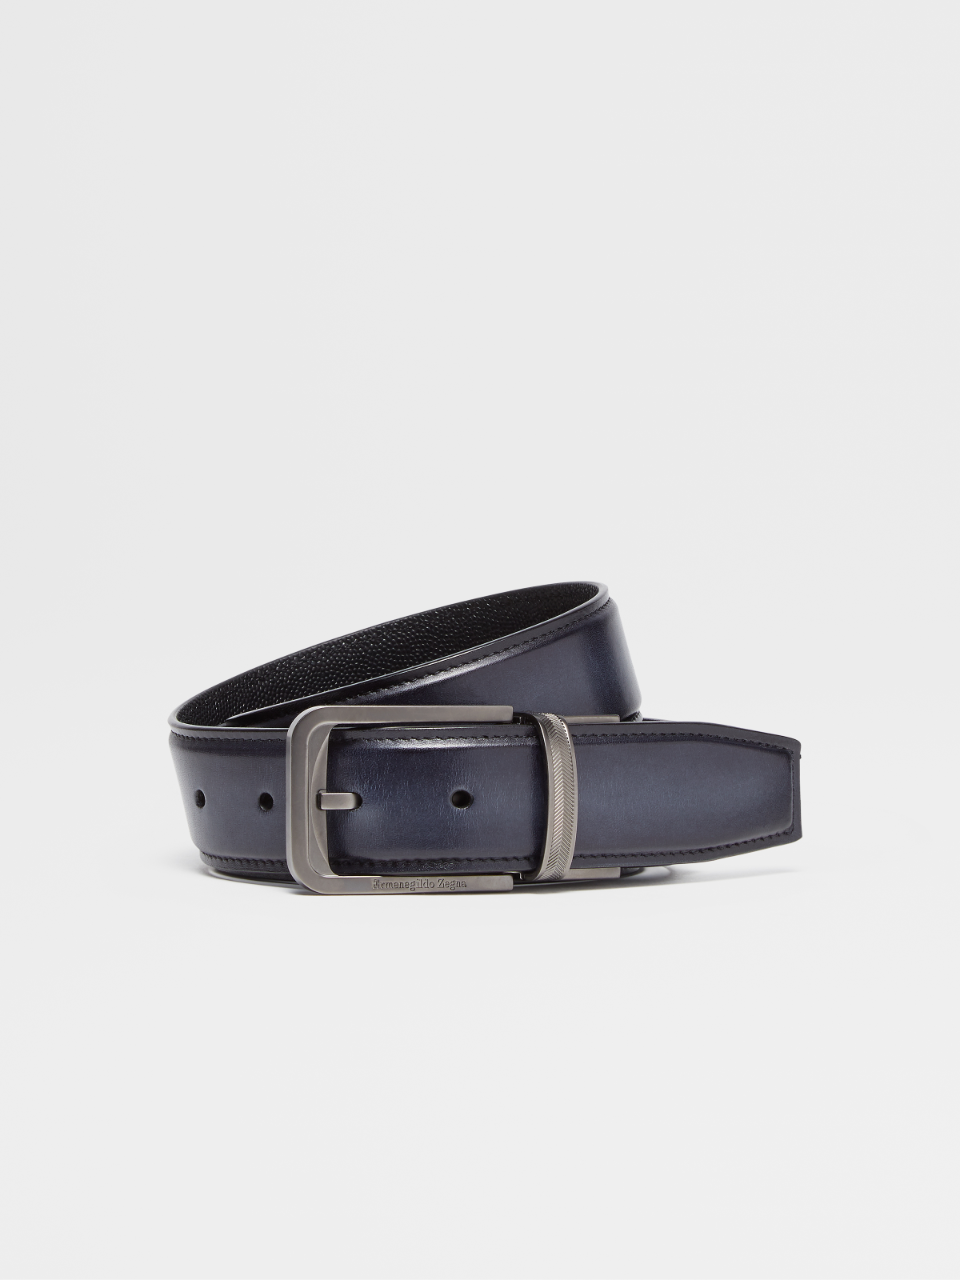 Blue Hand-buffed Leather and Black Grained Leather Reversible Belt